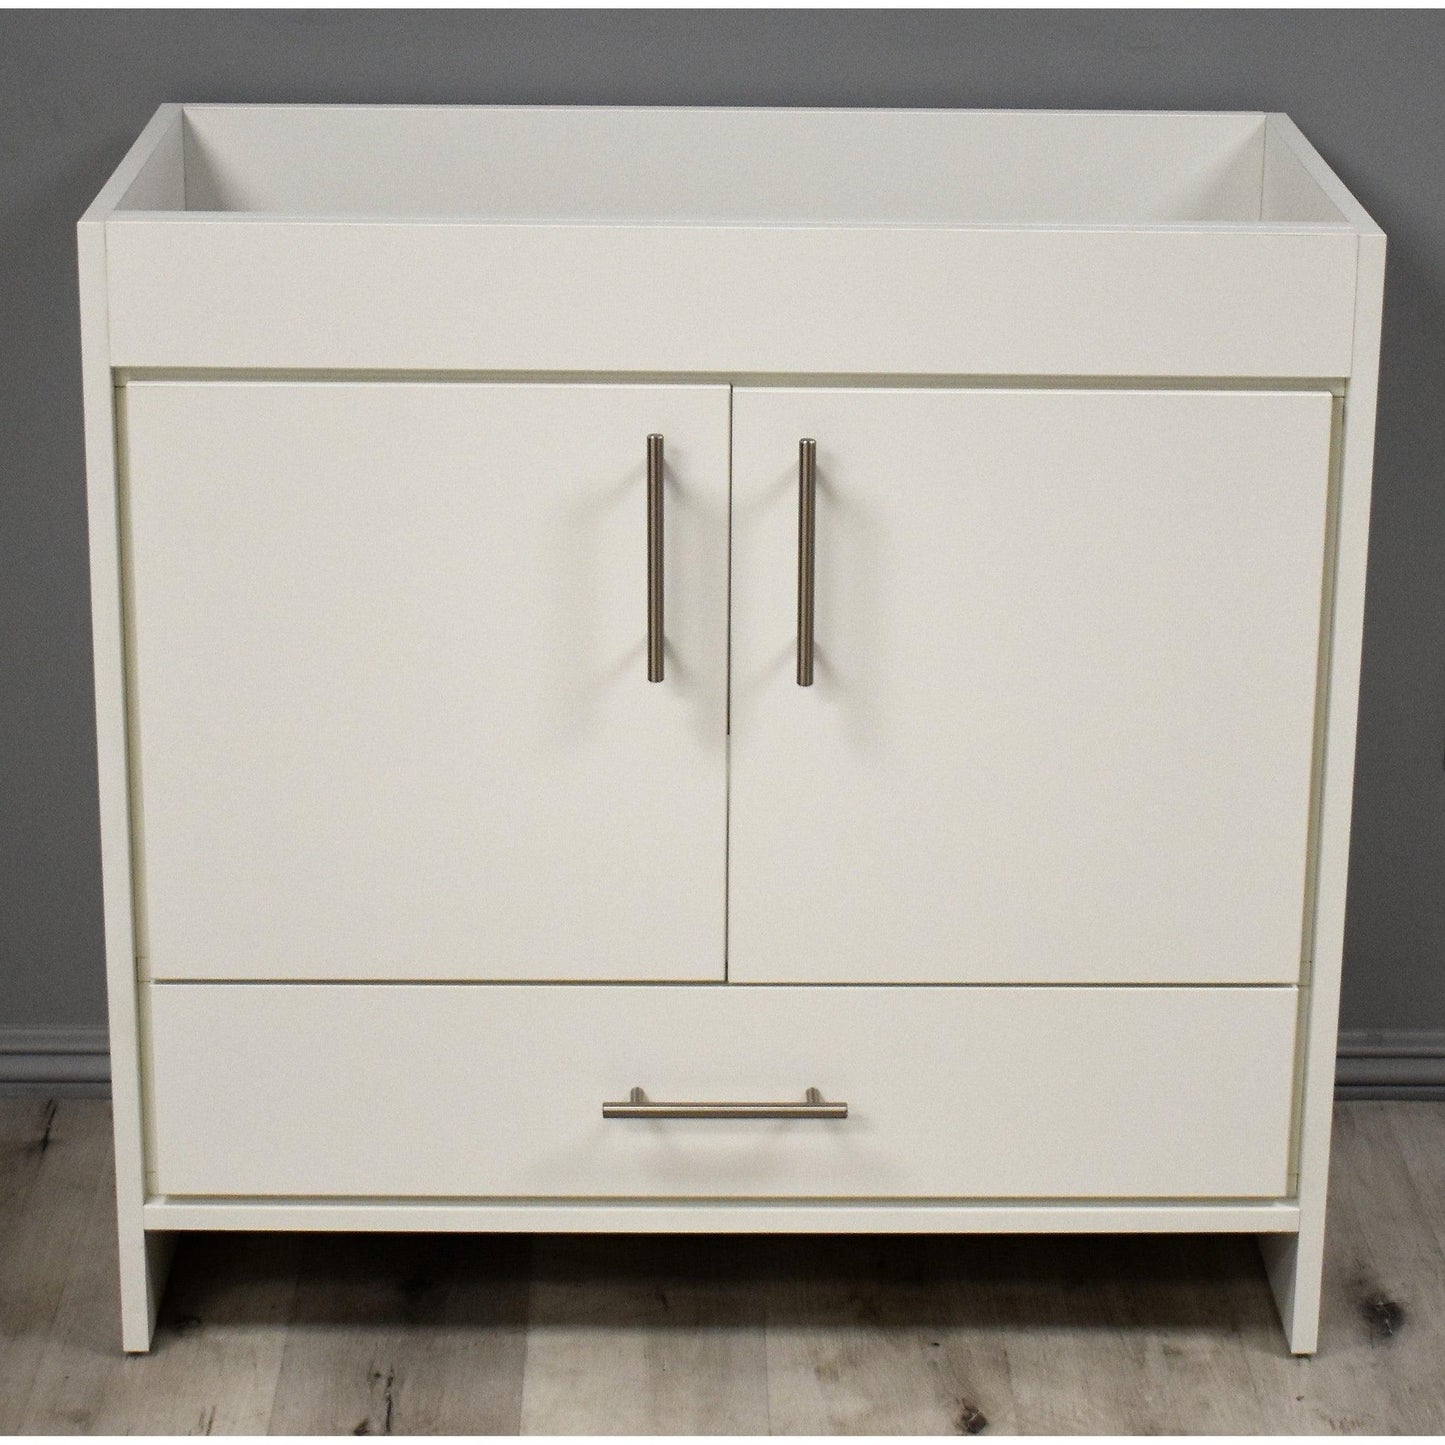 Volpa USA Pacific 36" Soft White Freestanding Modern Bathroom Vanity With Brushed Nickel Round Handles Cabinet Only